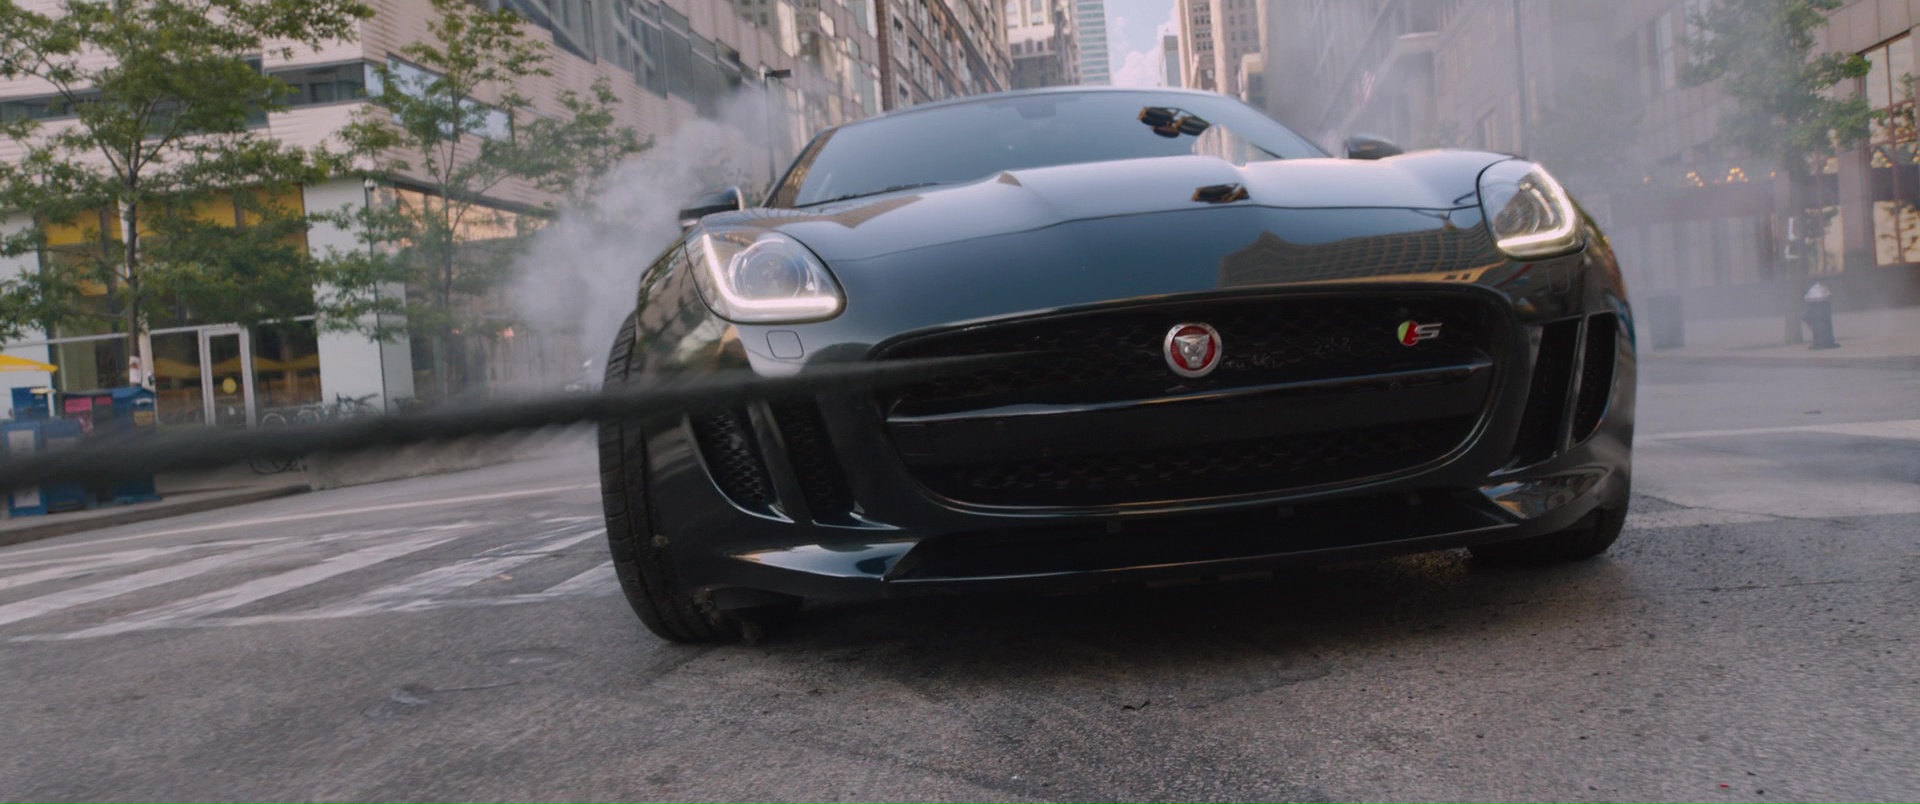 Jaguar F-Type Coupé Sports Car in The Fate of the Furious (2017) Movie